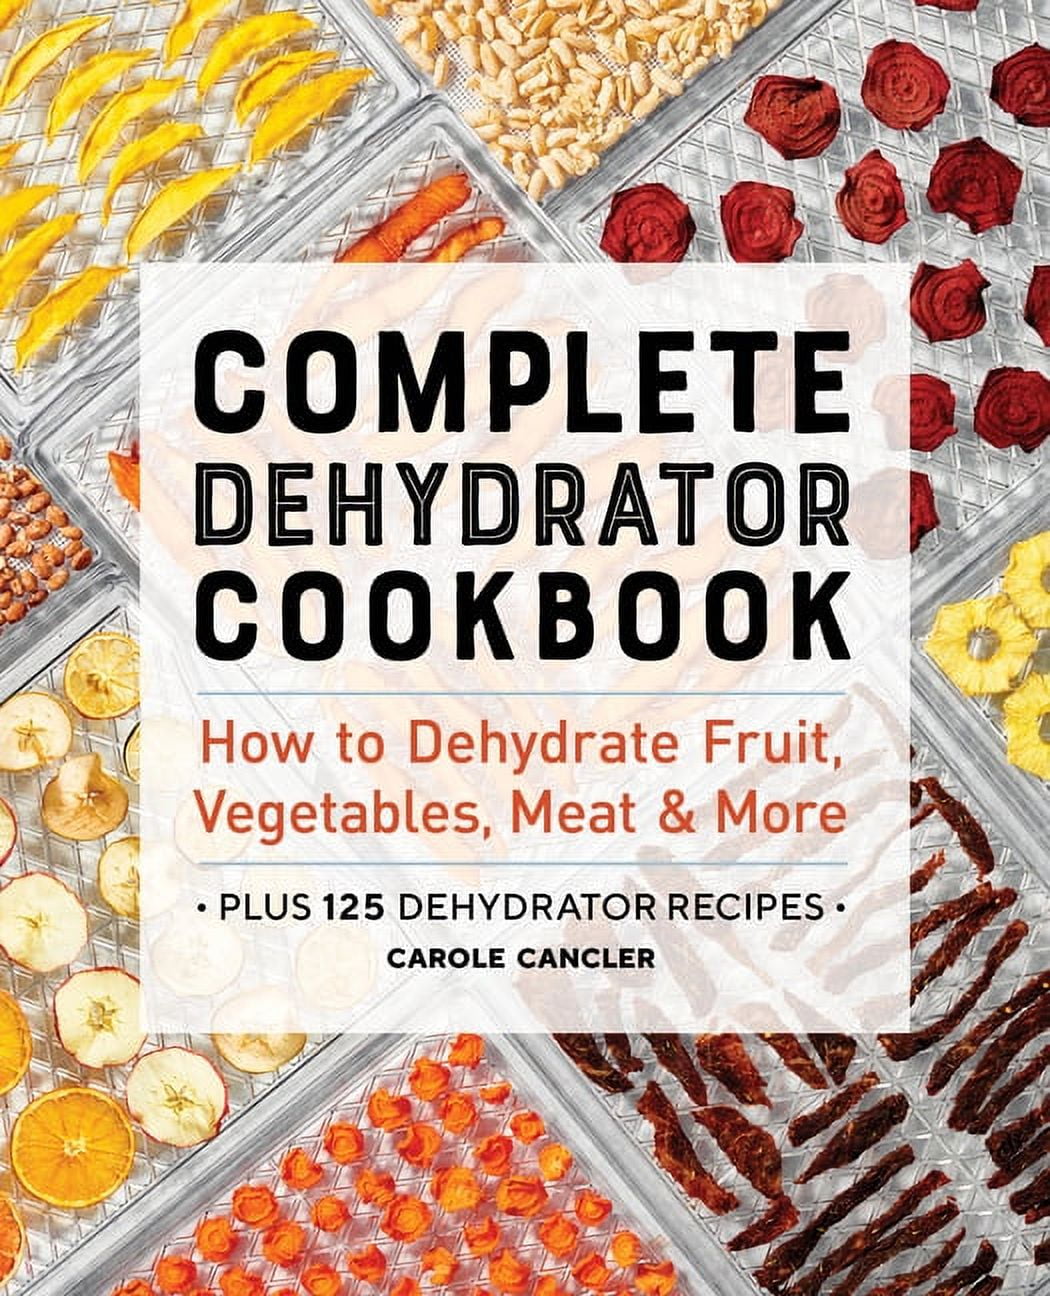 Dehydrator Cookbook For Preppers: The Complete Homemade Guide to Dehydrate Meats, Fish, Grains, Fruits, and Vegetables with Safe Storage Techniques and Easy to Make Recipes Including Vegan Dehydrated Ingredients [Book]